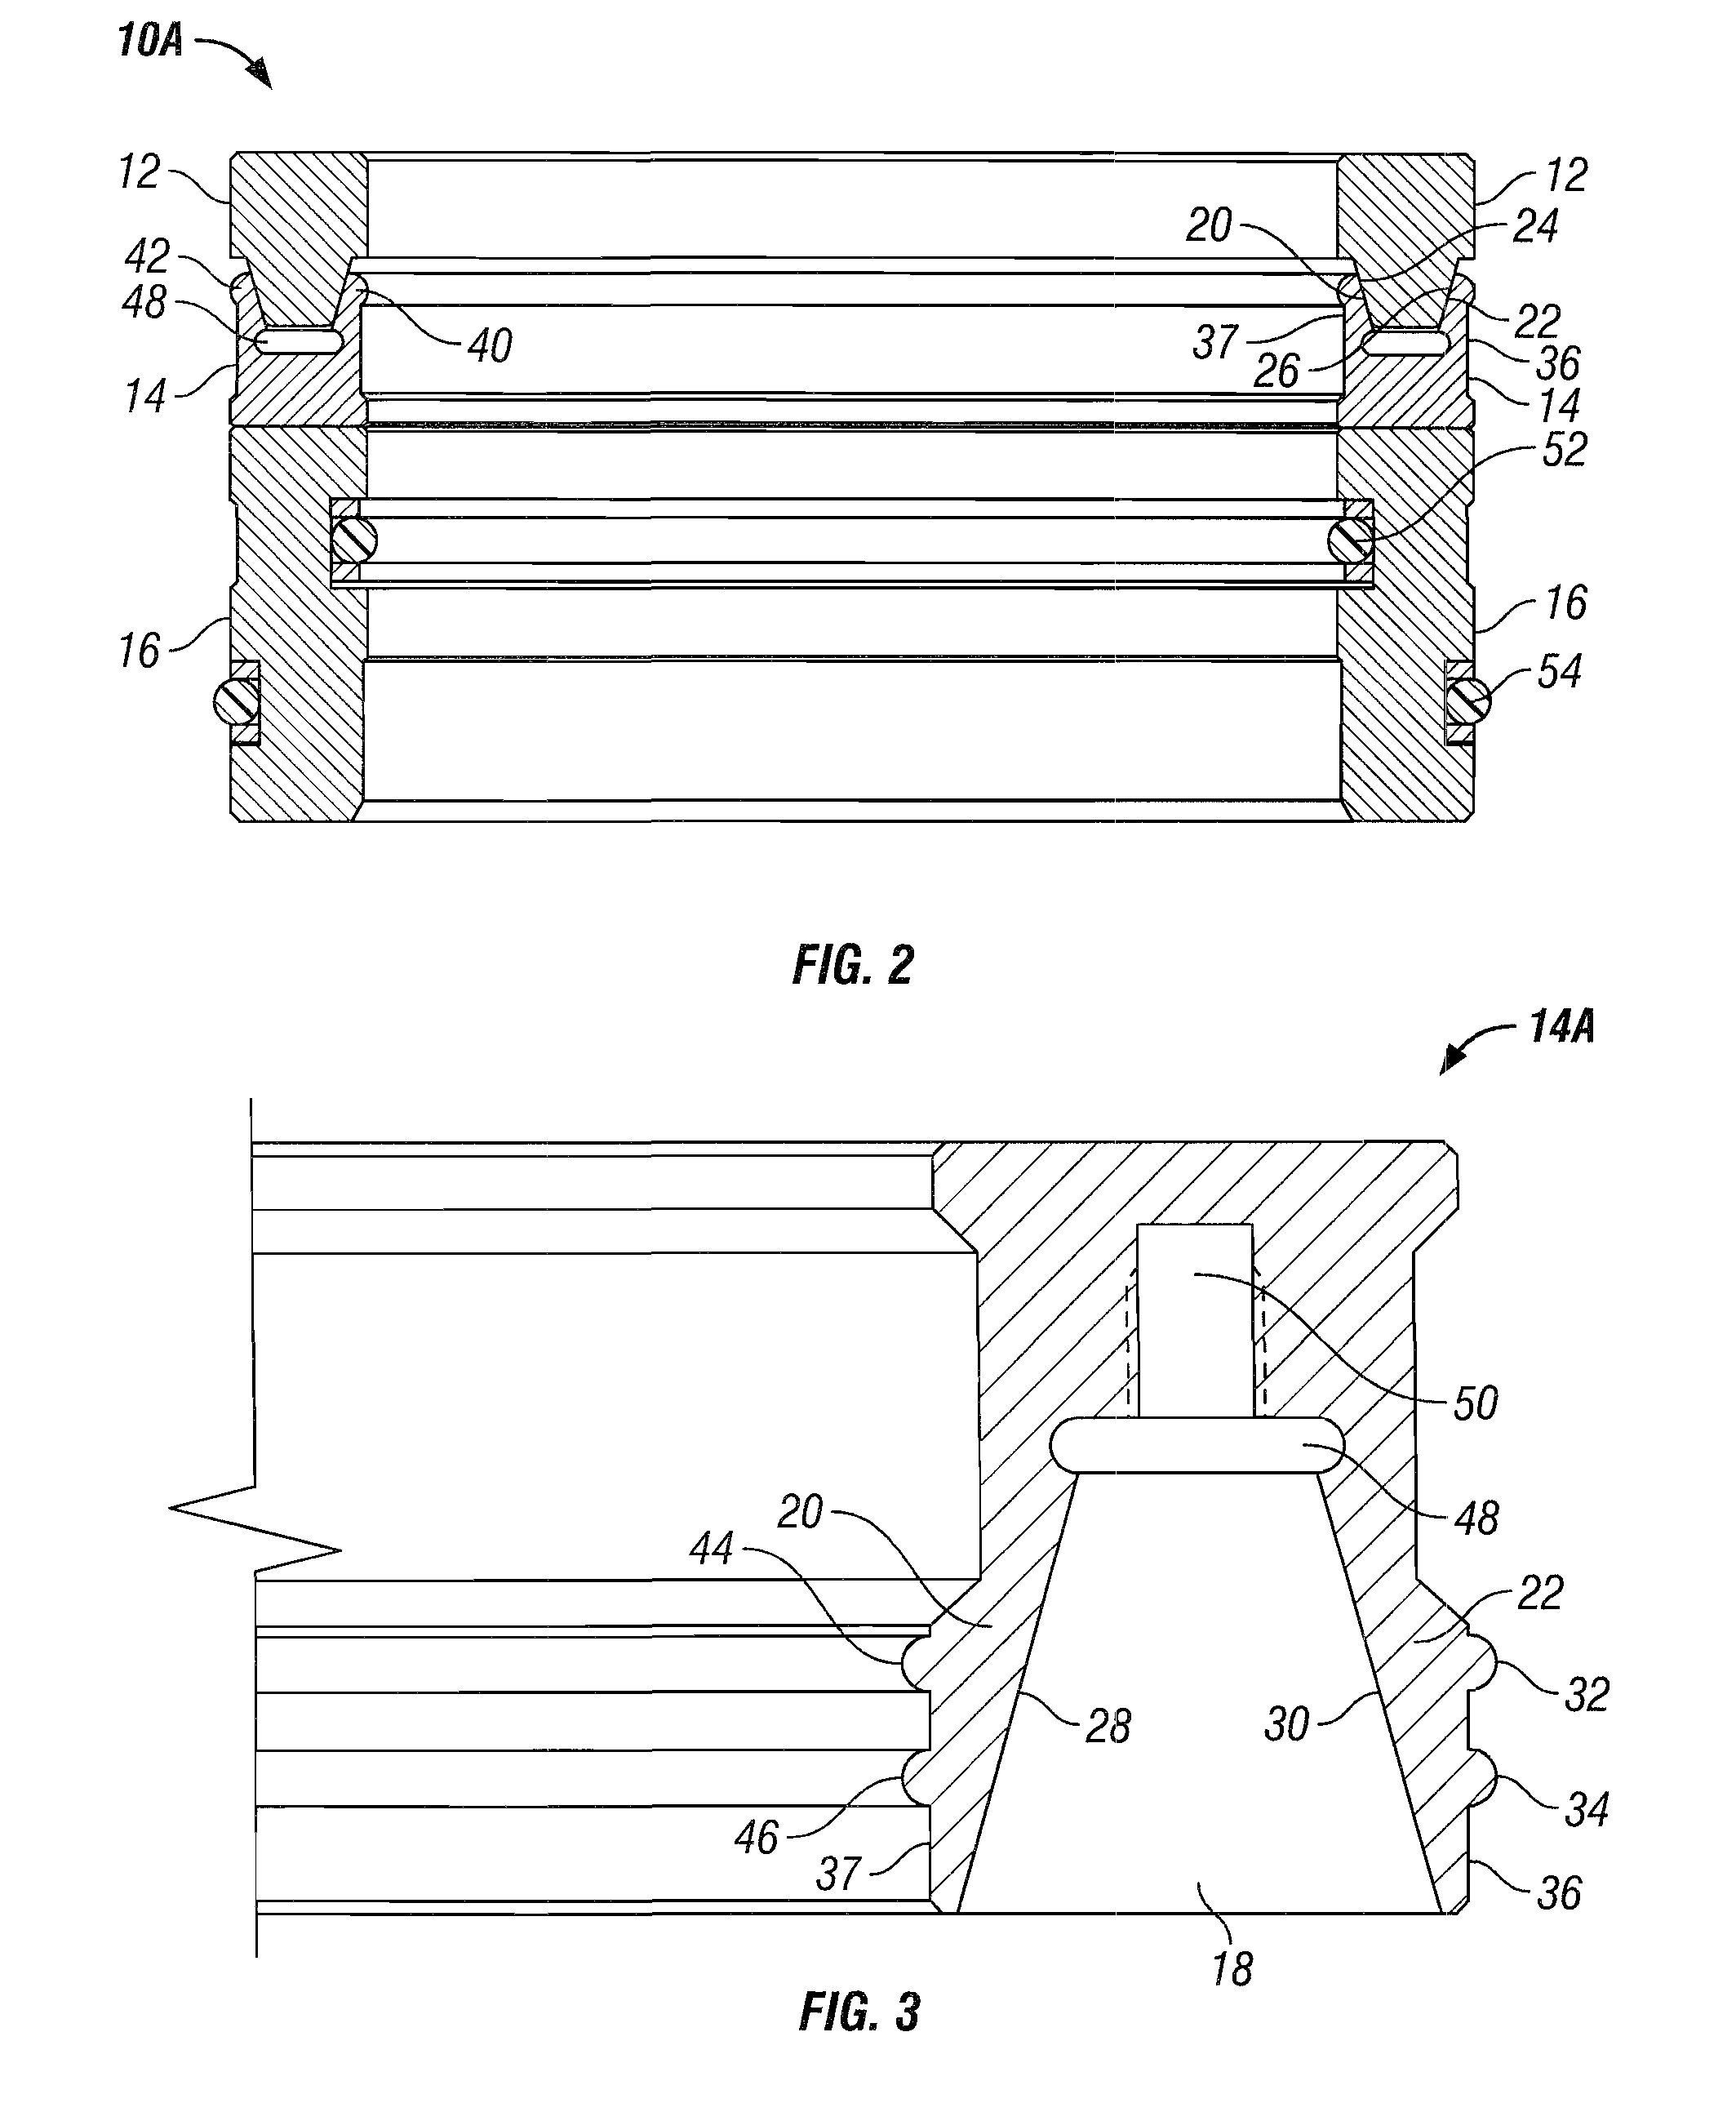 Resilient High Pressure Metal-to-Metal Seal and Method